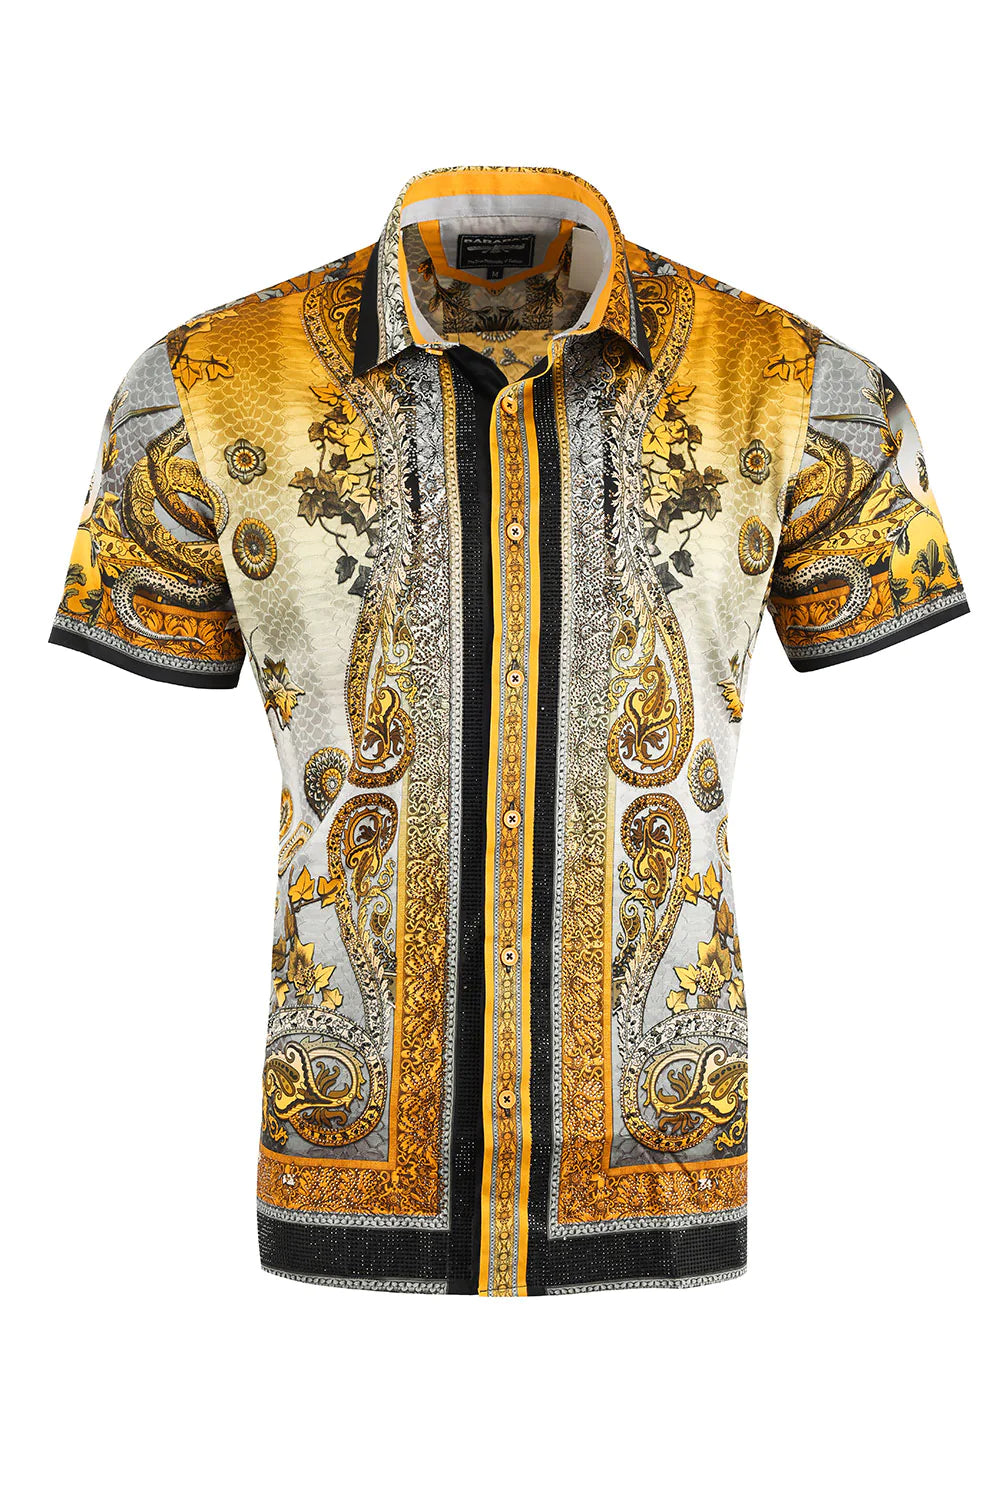 Barbas Exquisite Peacock Feather Shirt T-SHIRTS Barabas Collection Vercini